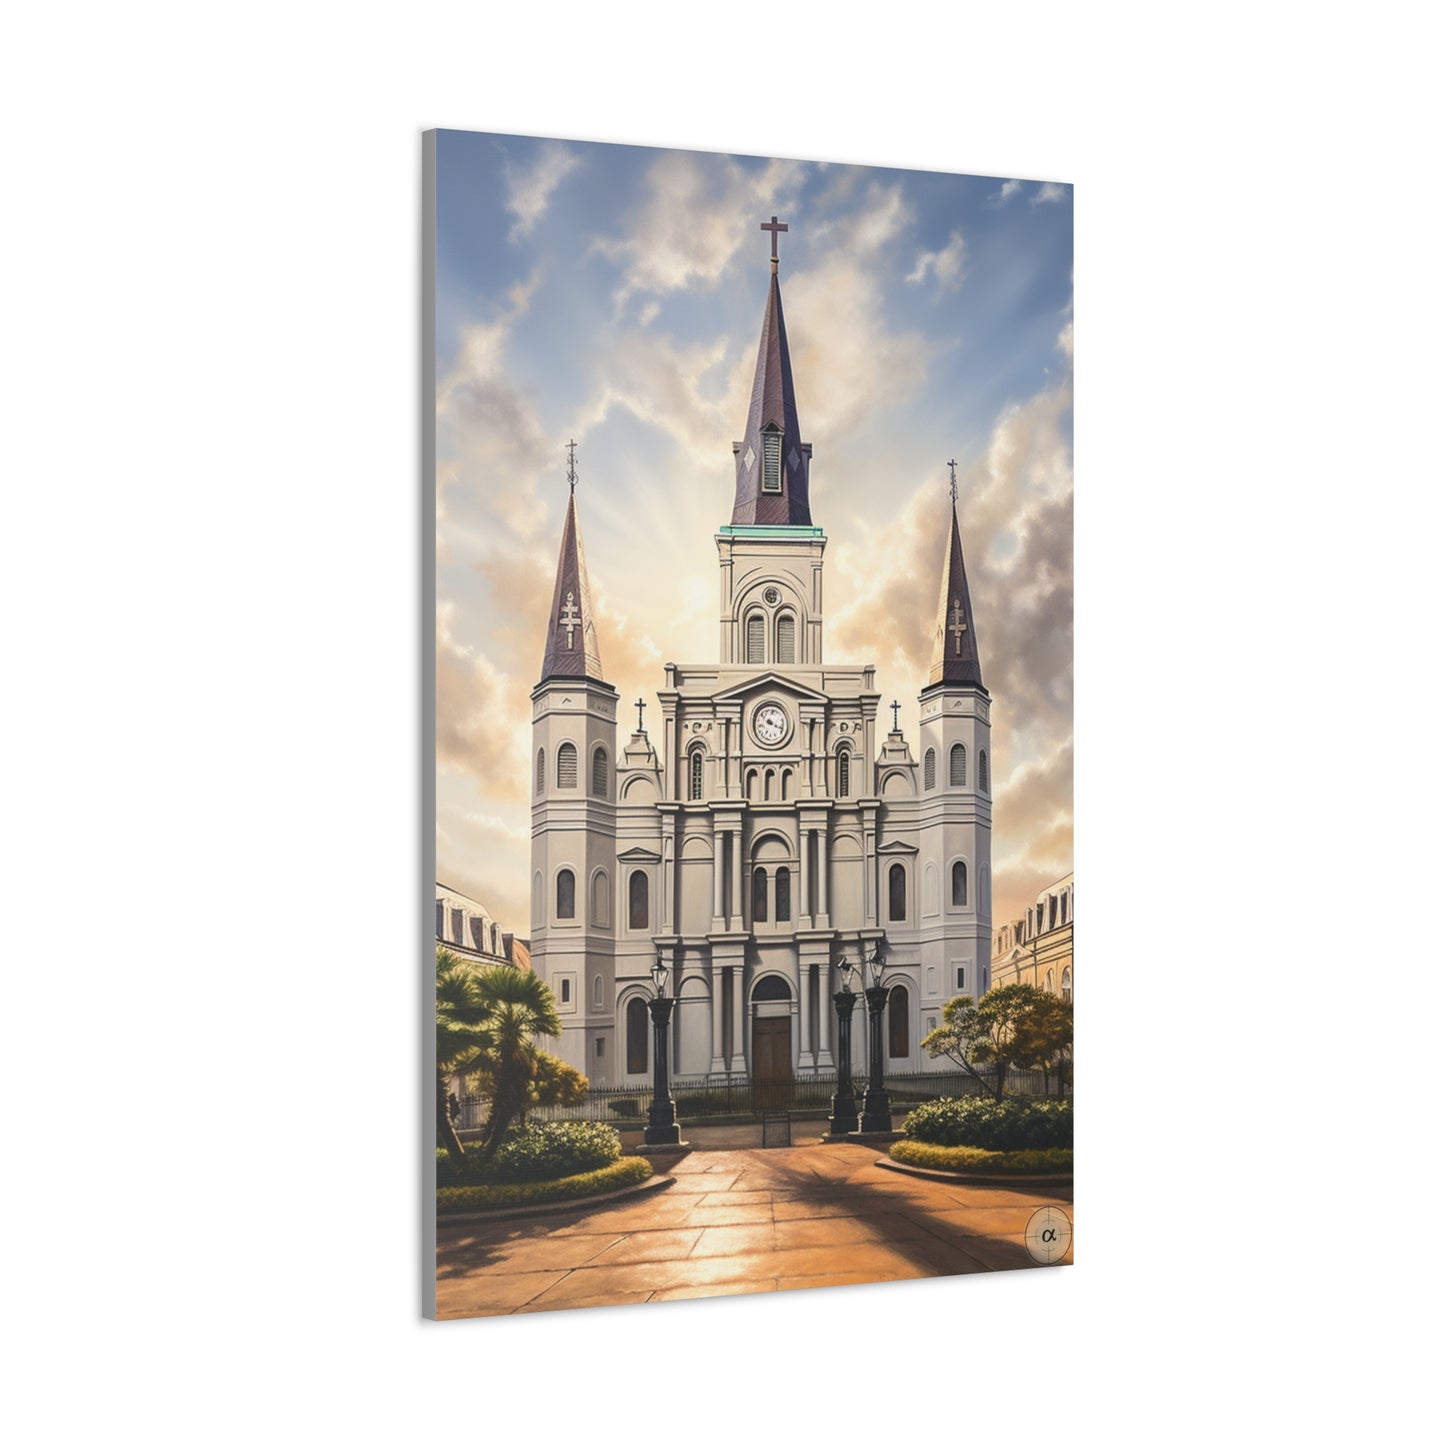 Art by Kendyll: "Cathedral in White" on Canvas